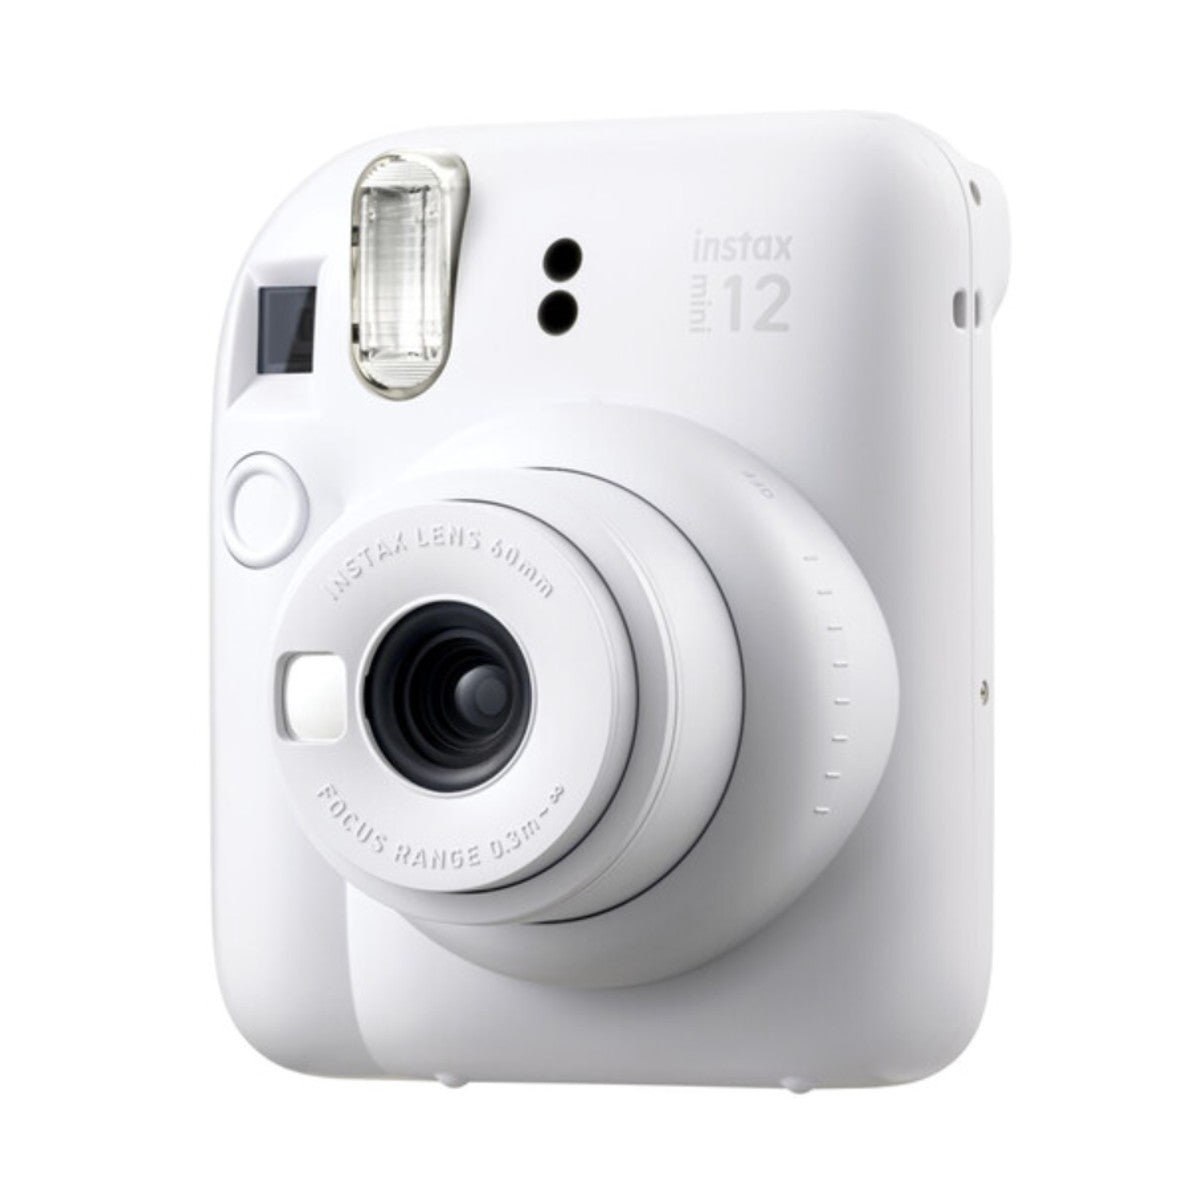 The Best Looking Instant Camera: Fujifilm Launches the Instax Mini